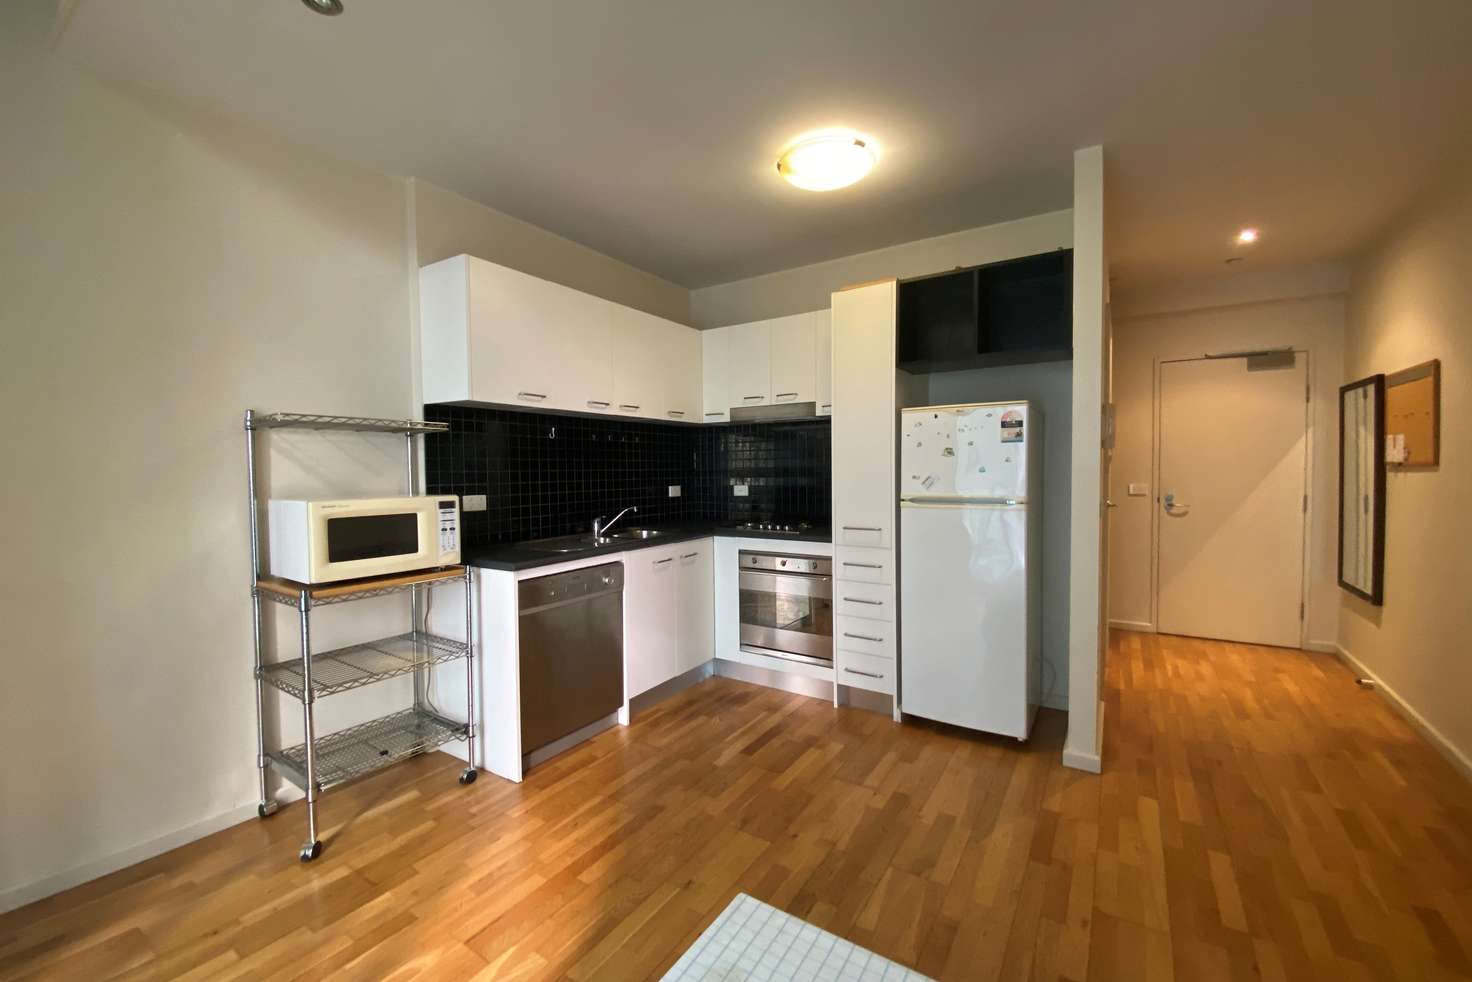 Main view of Homely apartment listing, 1506/87 Franklin Street, Melbourne VIC 3000